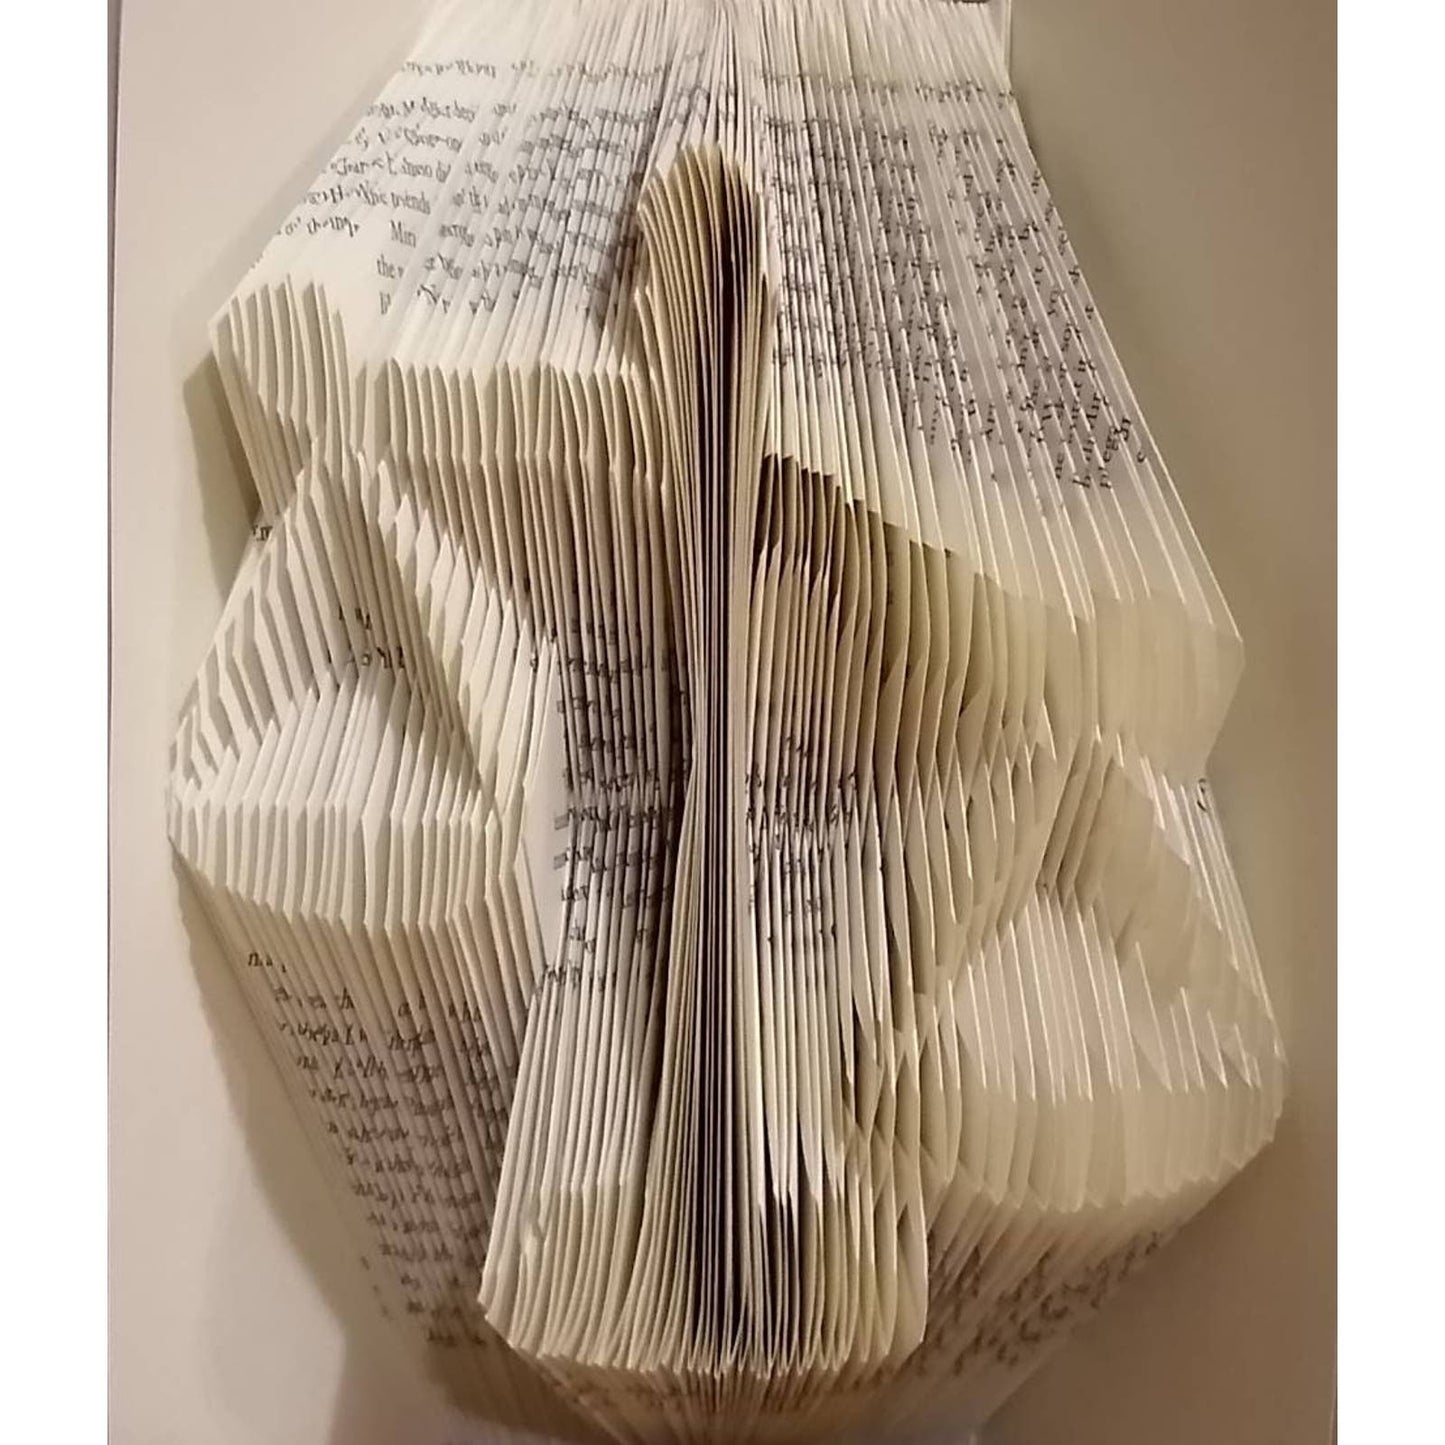 Folded Book Art, Scales of Justice, Lawyer Gift, Judge Present